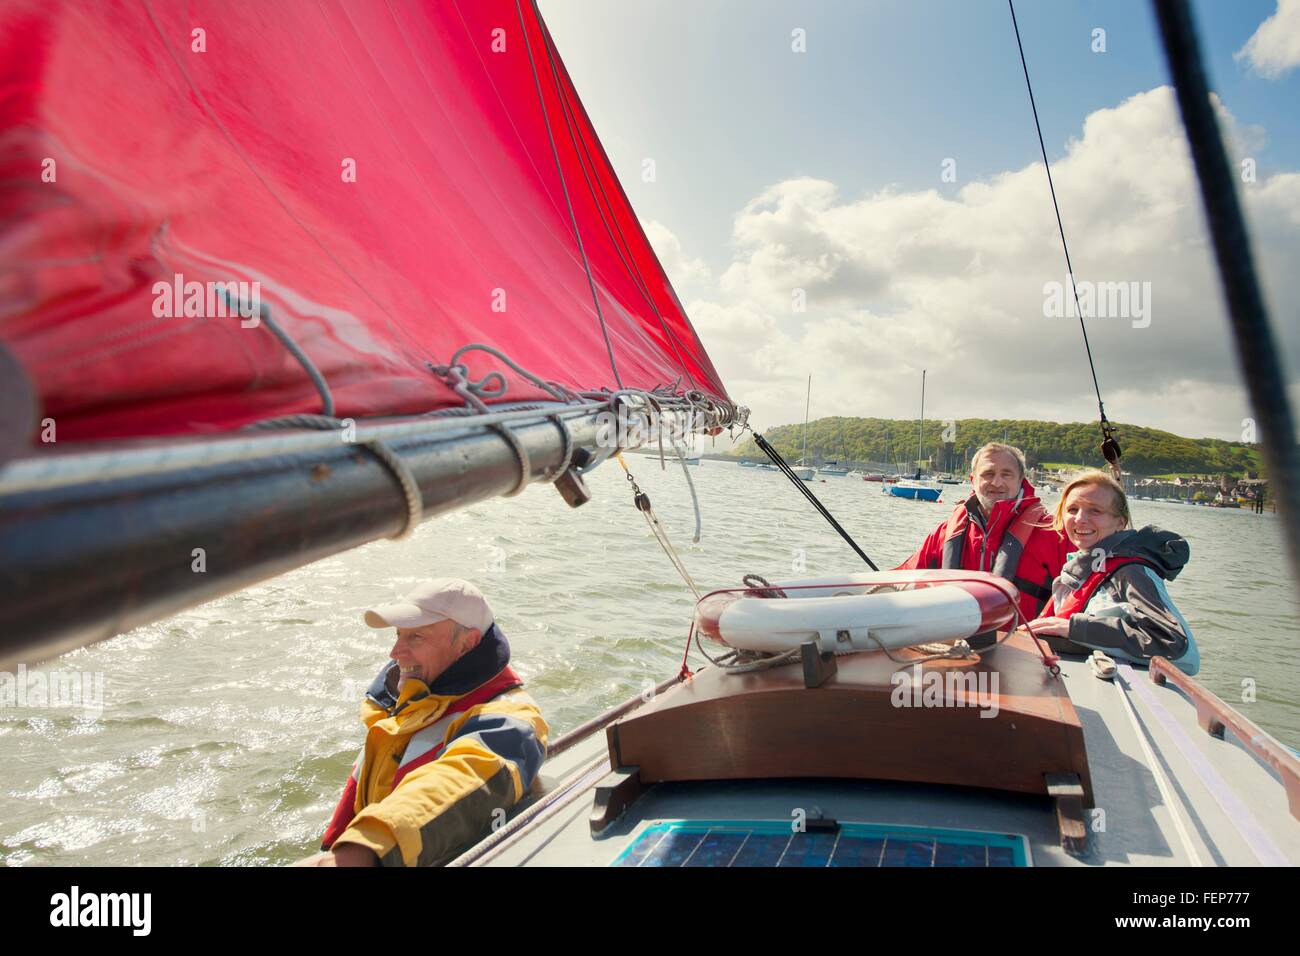 Small group of adults on sailing boat Stock Photo